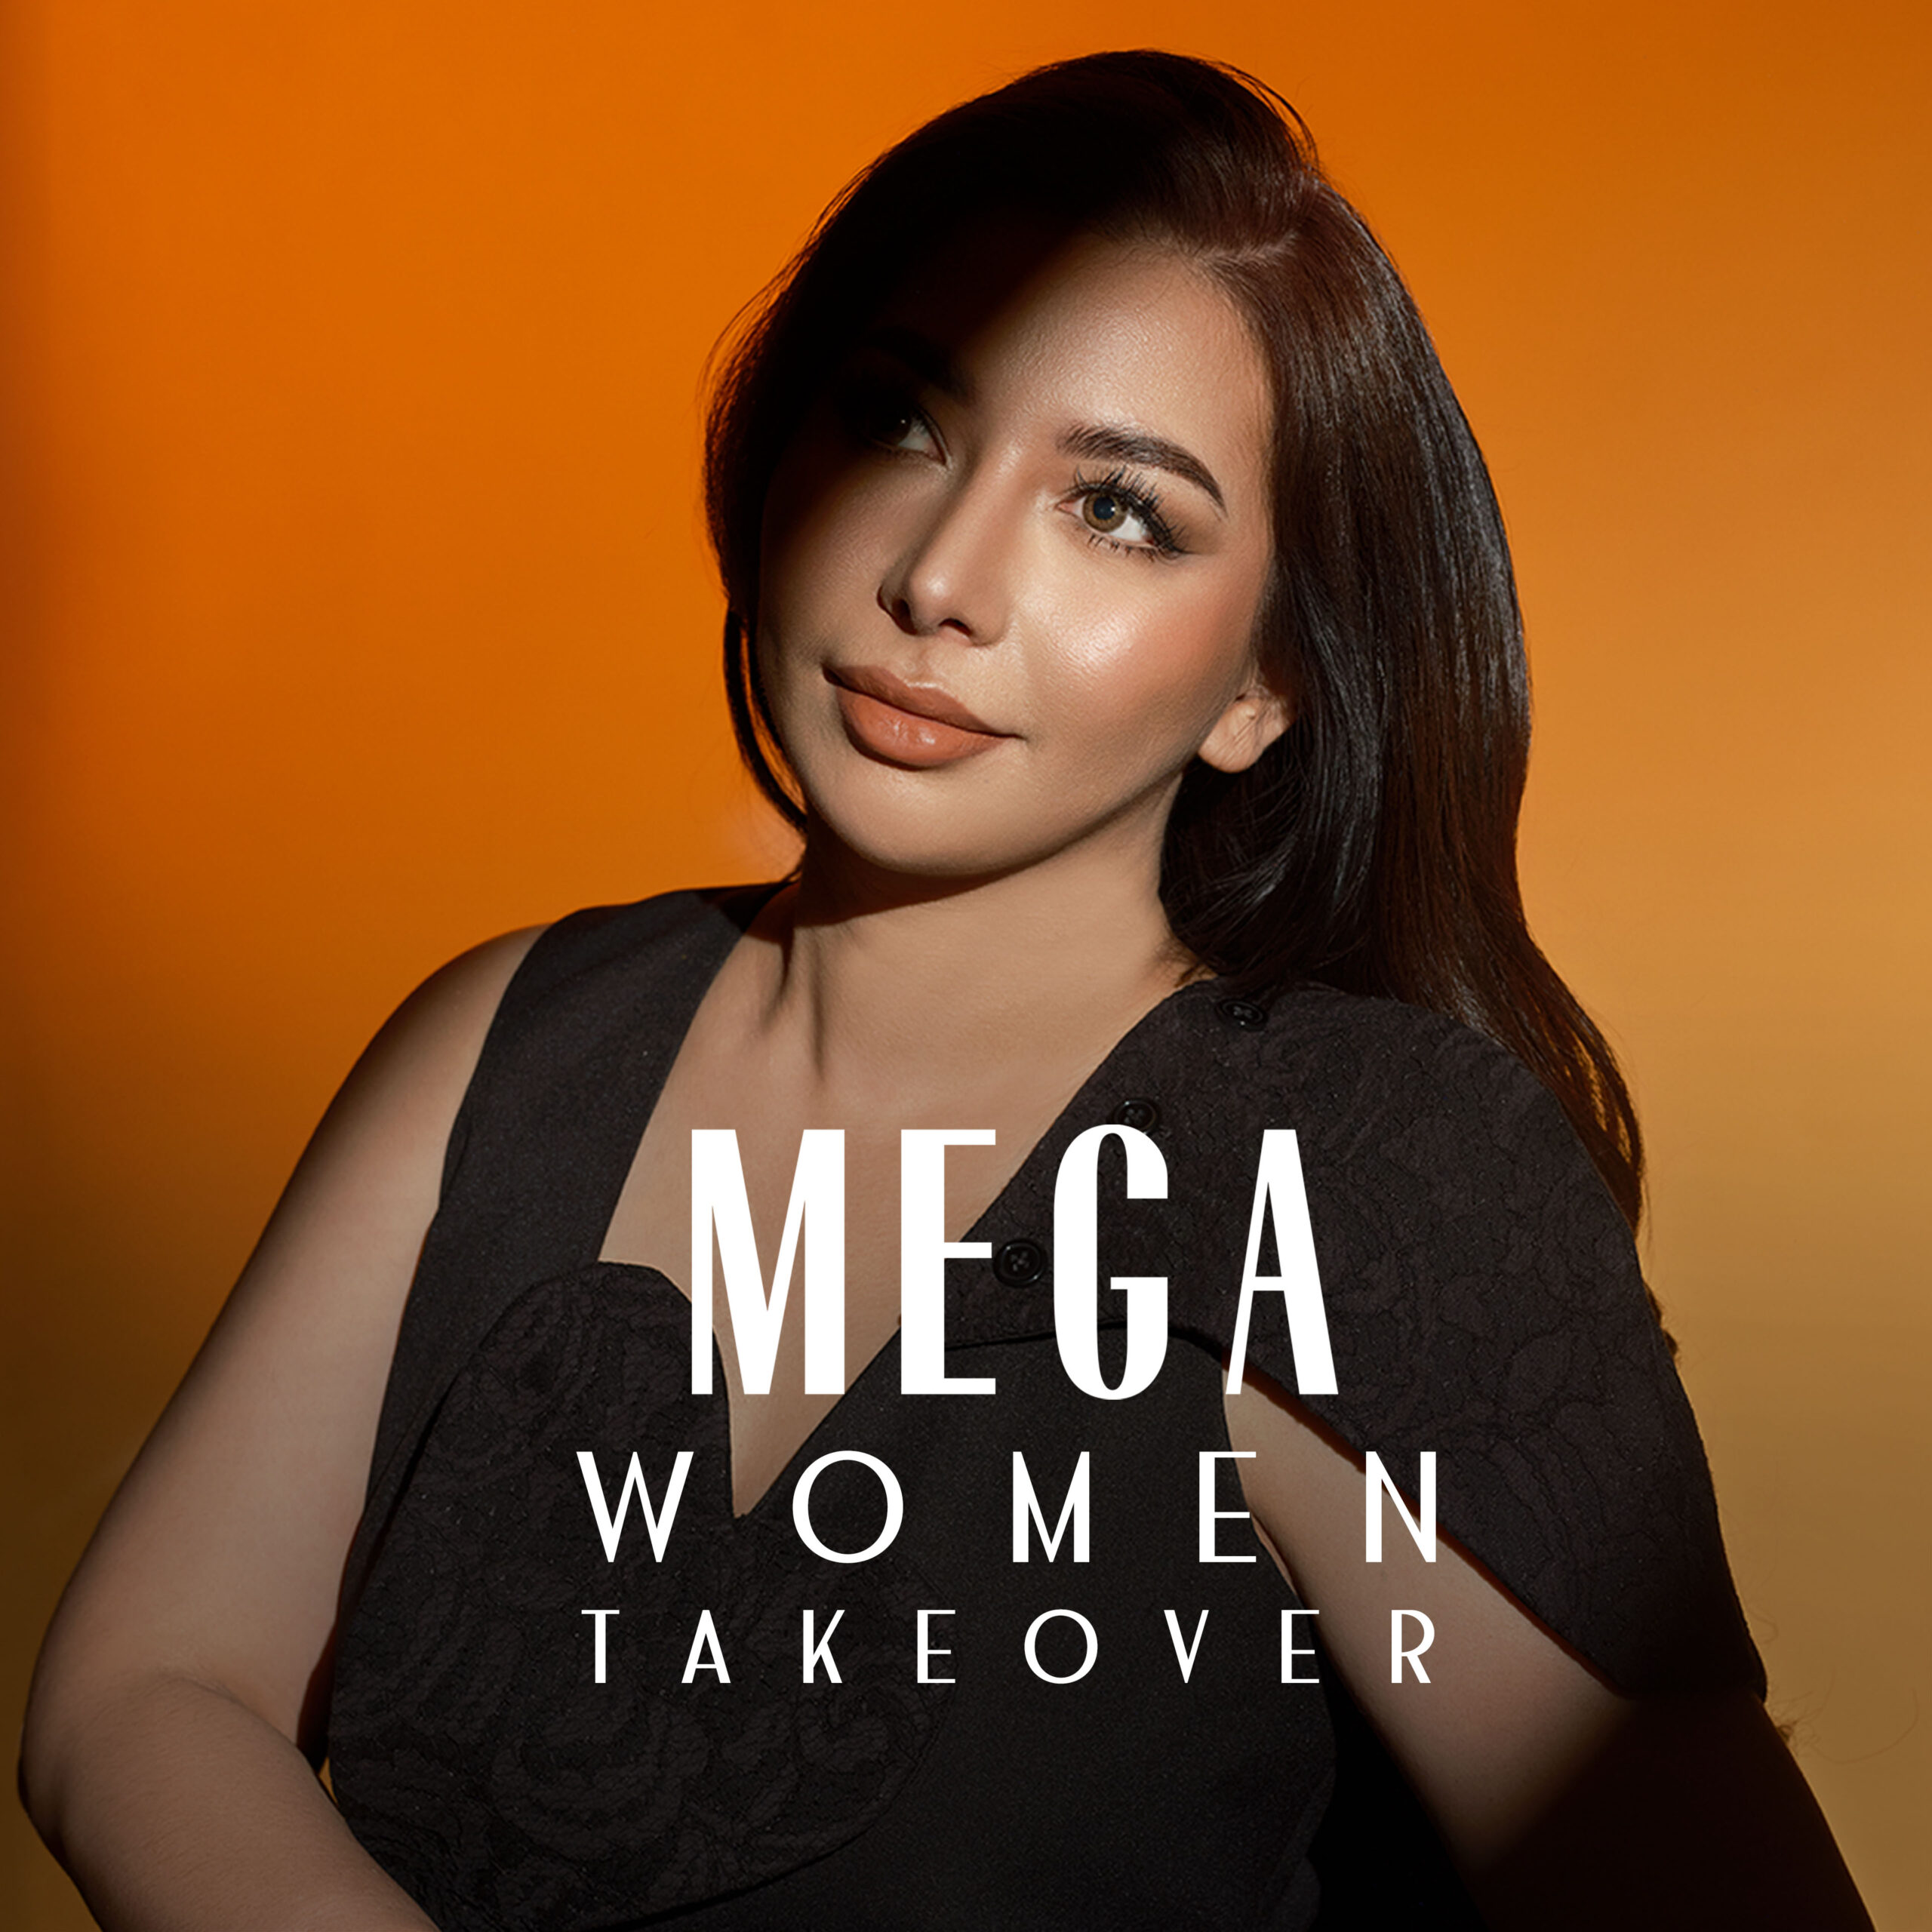 MEGA Women Takeover: Anna Magkawas is on a Mission to Empower and Inspire